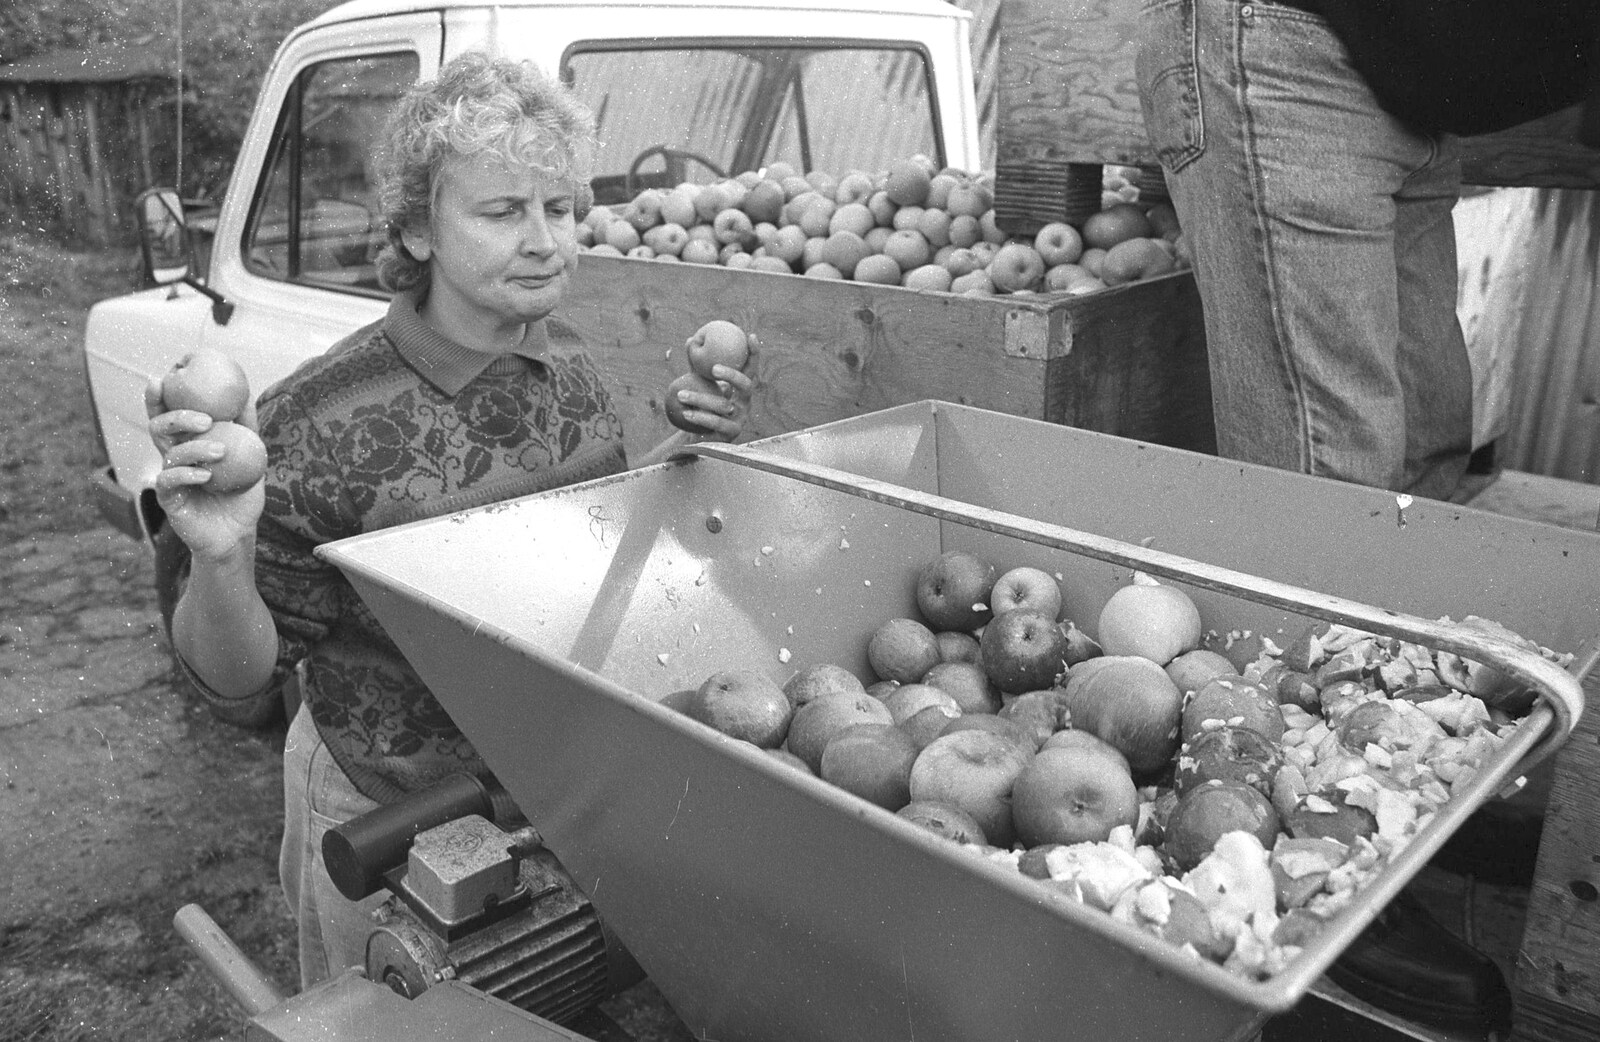 Linda Cork looks puzzled from Cider Making in Black and White, Stuston, Suffolk - 11th October 1992